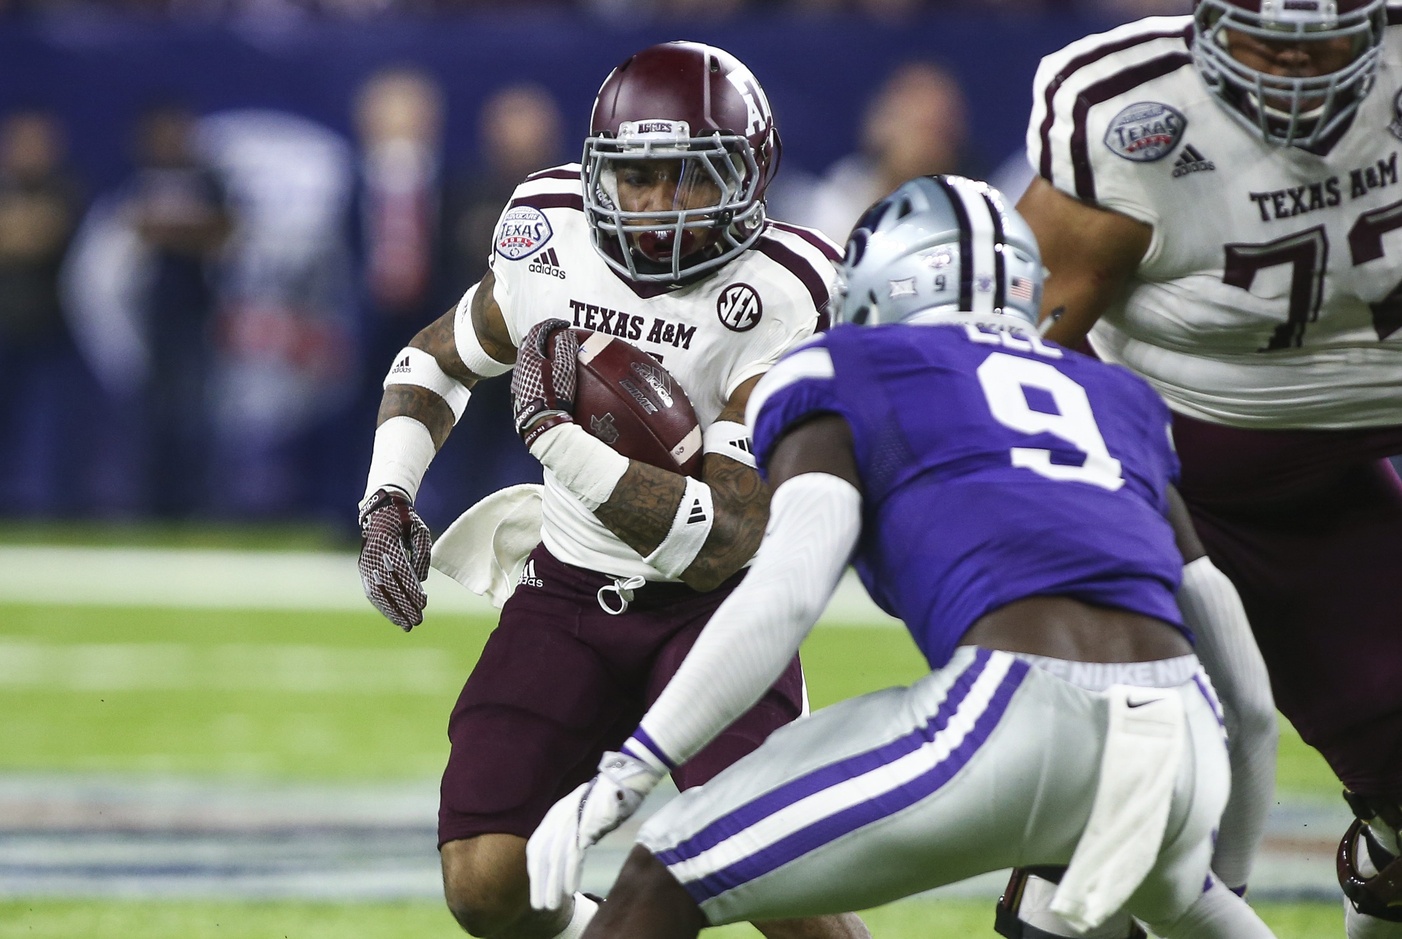 Dec 28, 2016; Houston, TX, USA; Texas A&M Aggies running back Trayveon Williams (5) rushes during the first quarter against the Kansas State Wildcats at NRG Stadium. Mandatory Credit: Troy Taormina-USA TODAY Sports